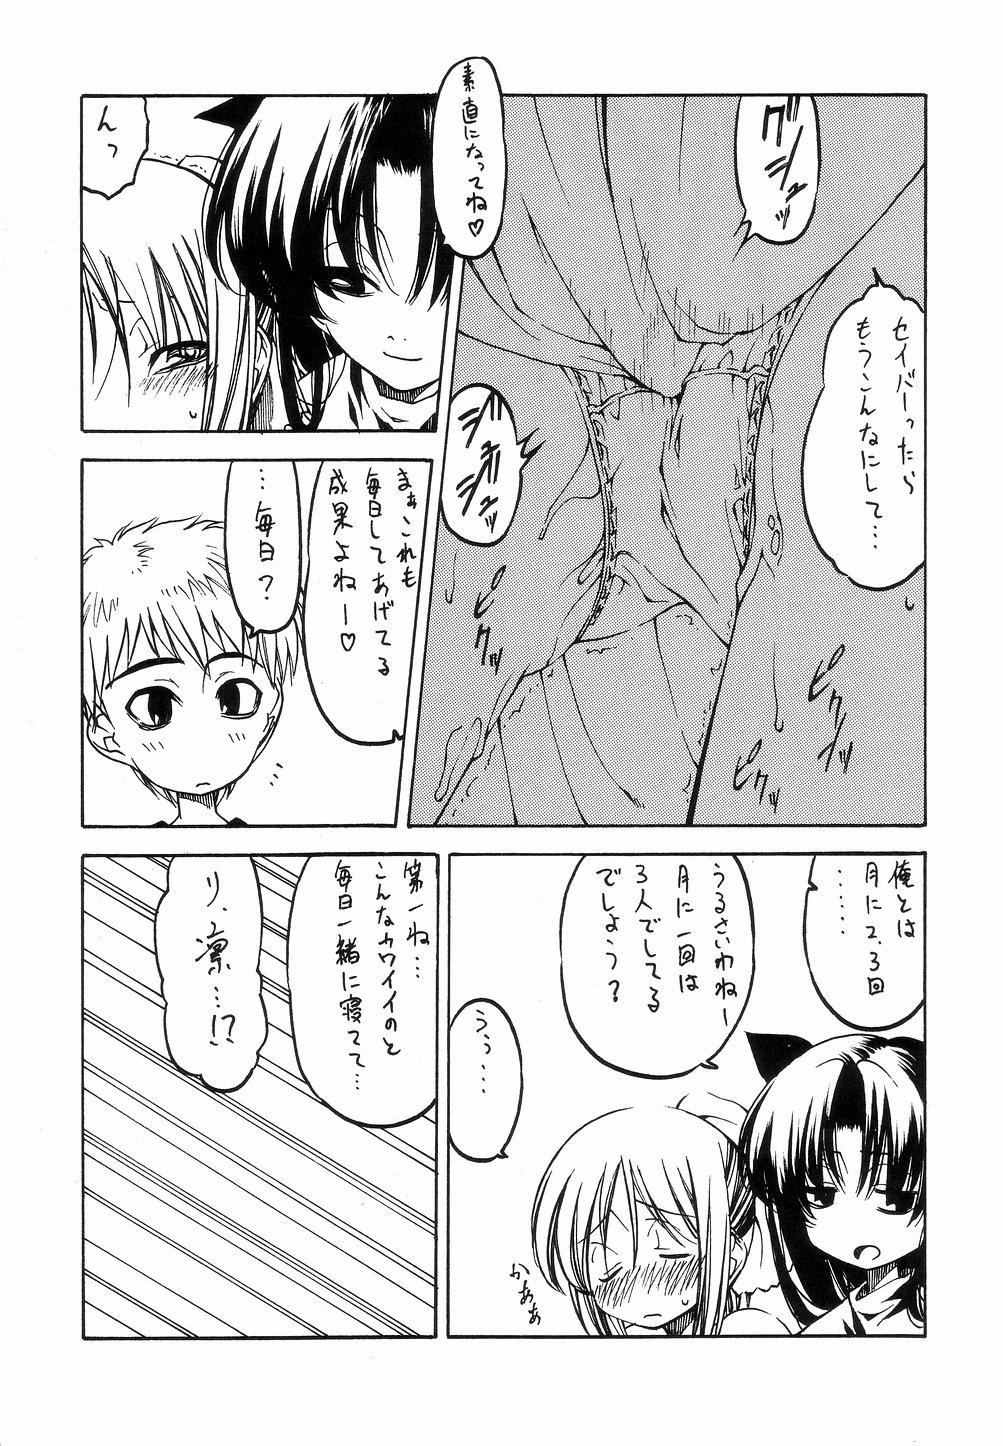 Finger Ou no Kigae - Fate stay night Teamskeet - Page 6